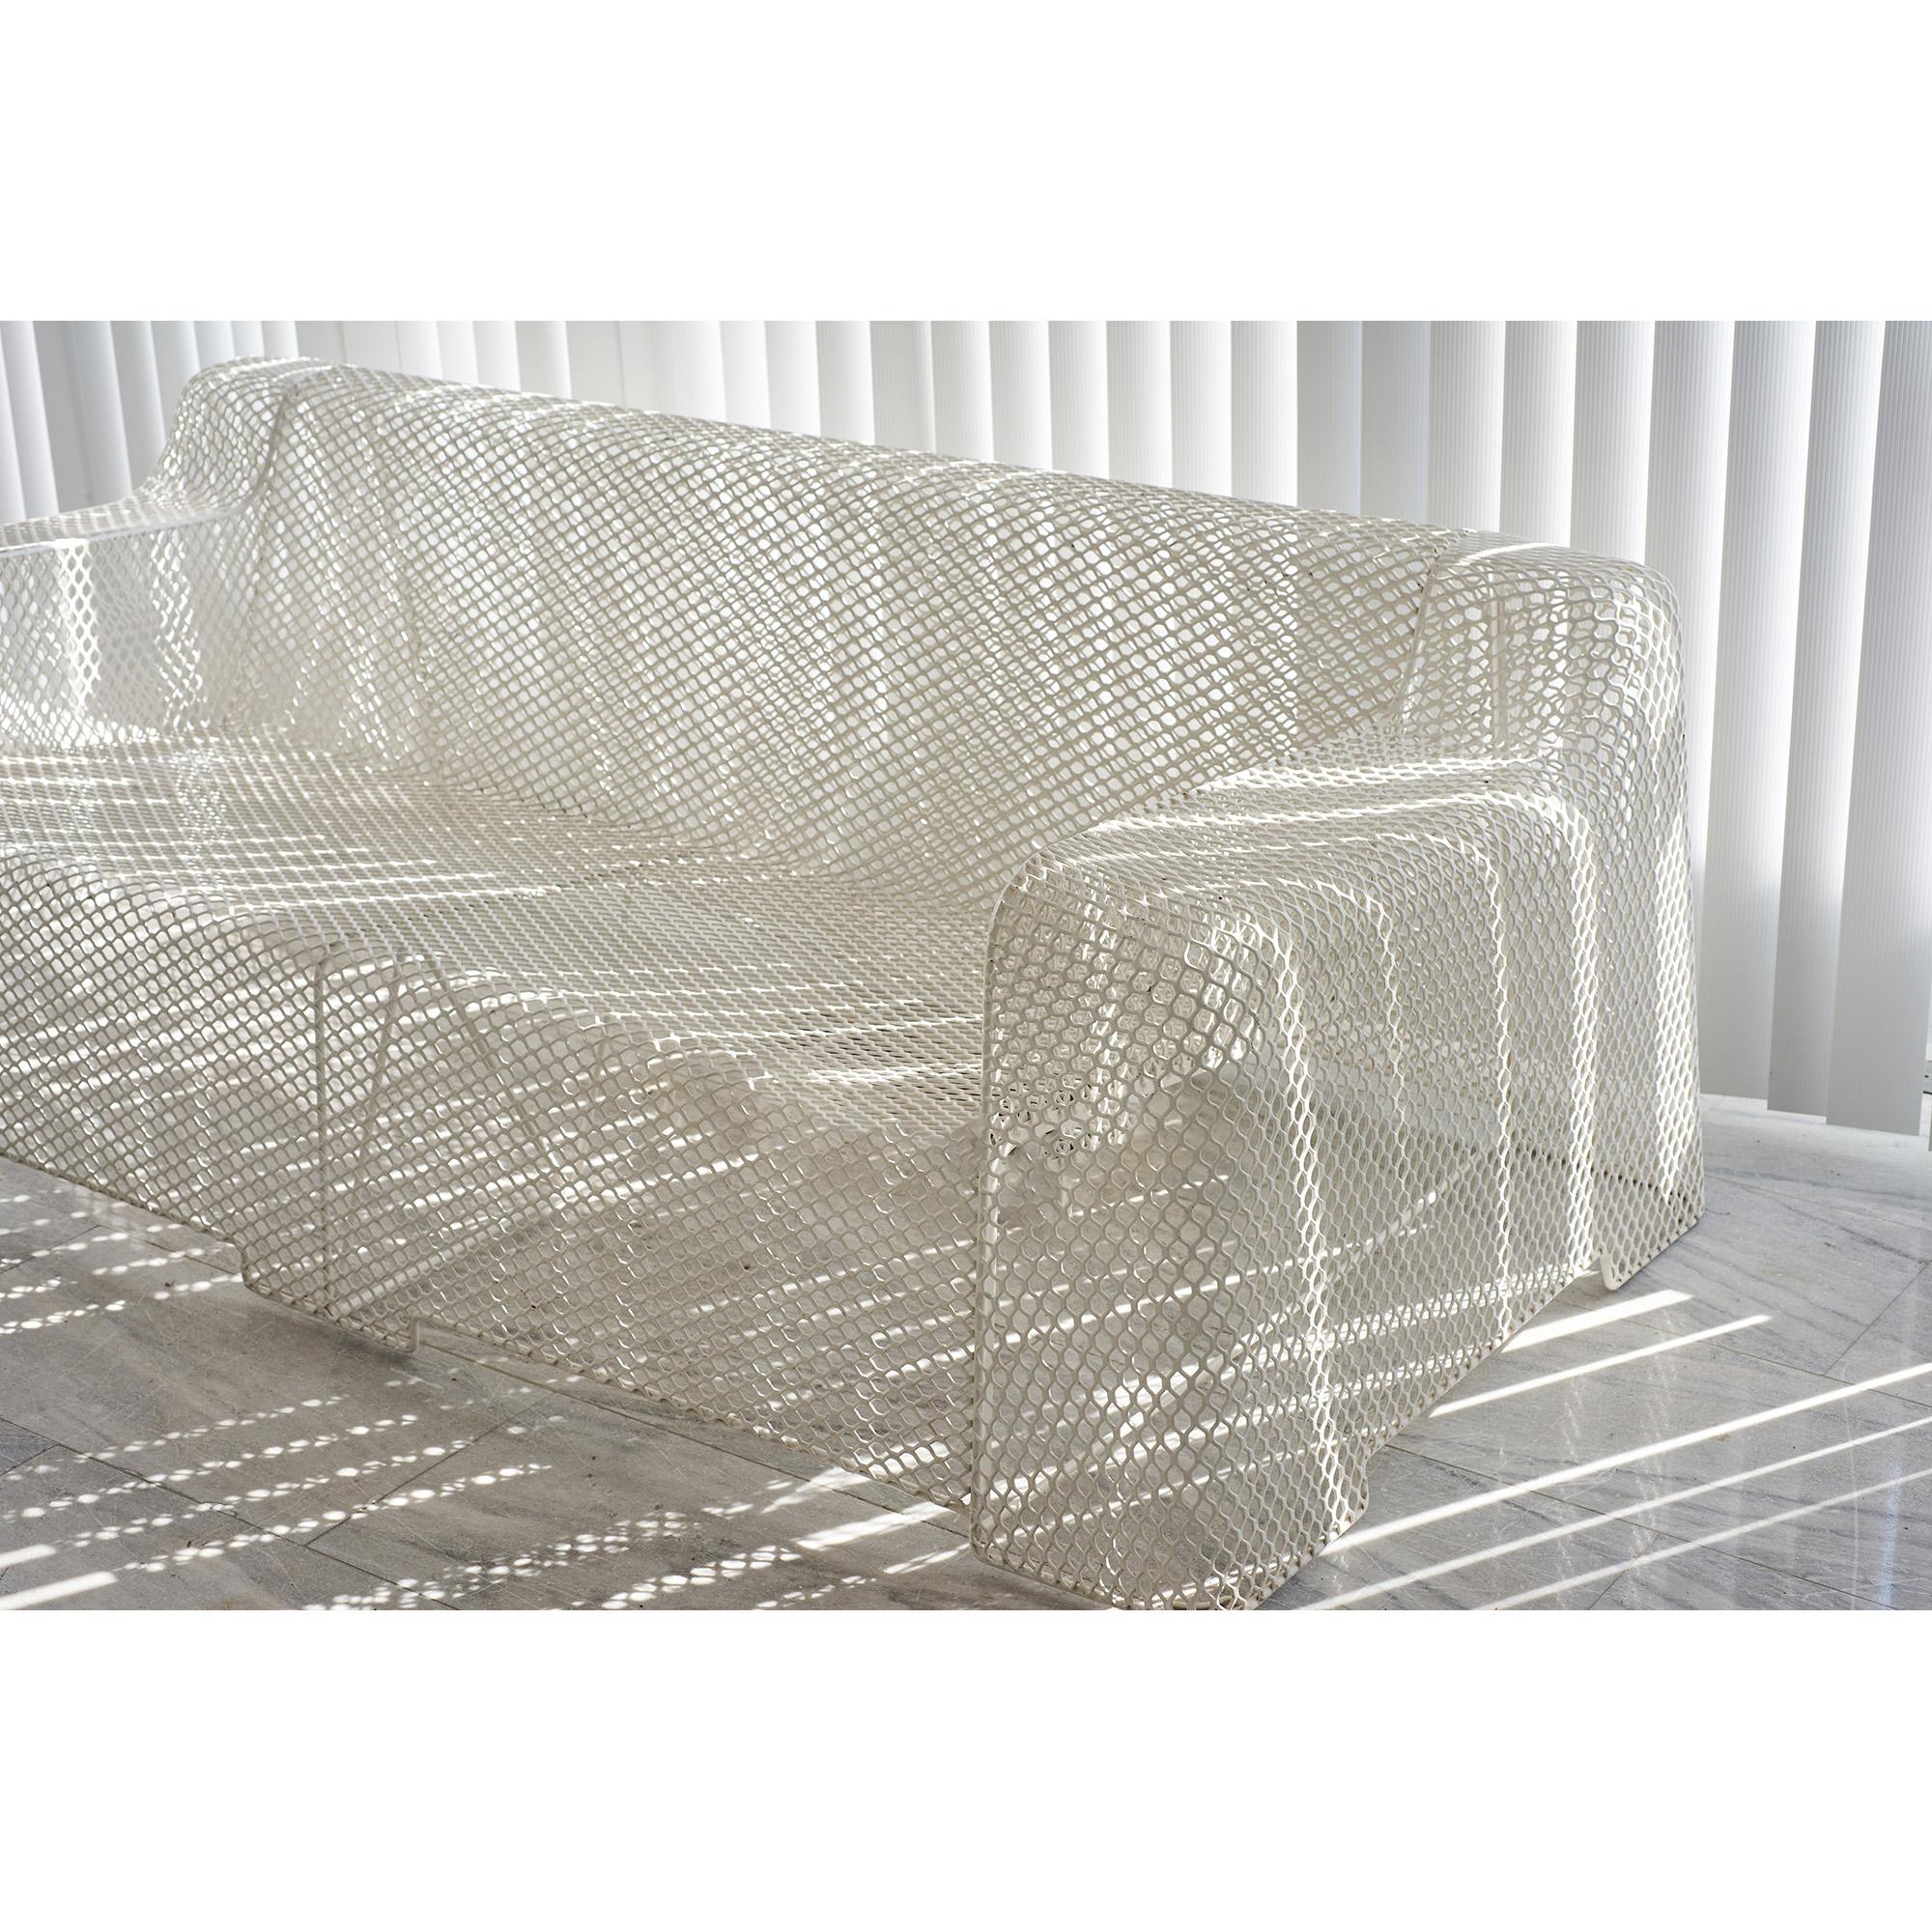 Minimalist Ivy sofa by Paola Navone for Emu, Italy For Sale